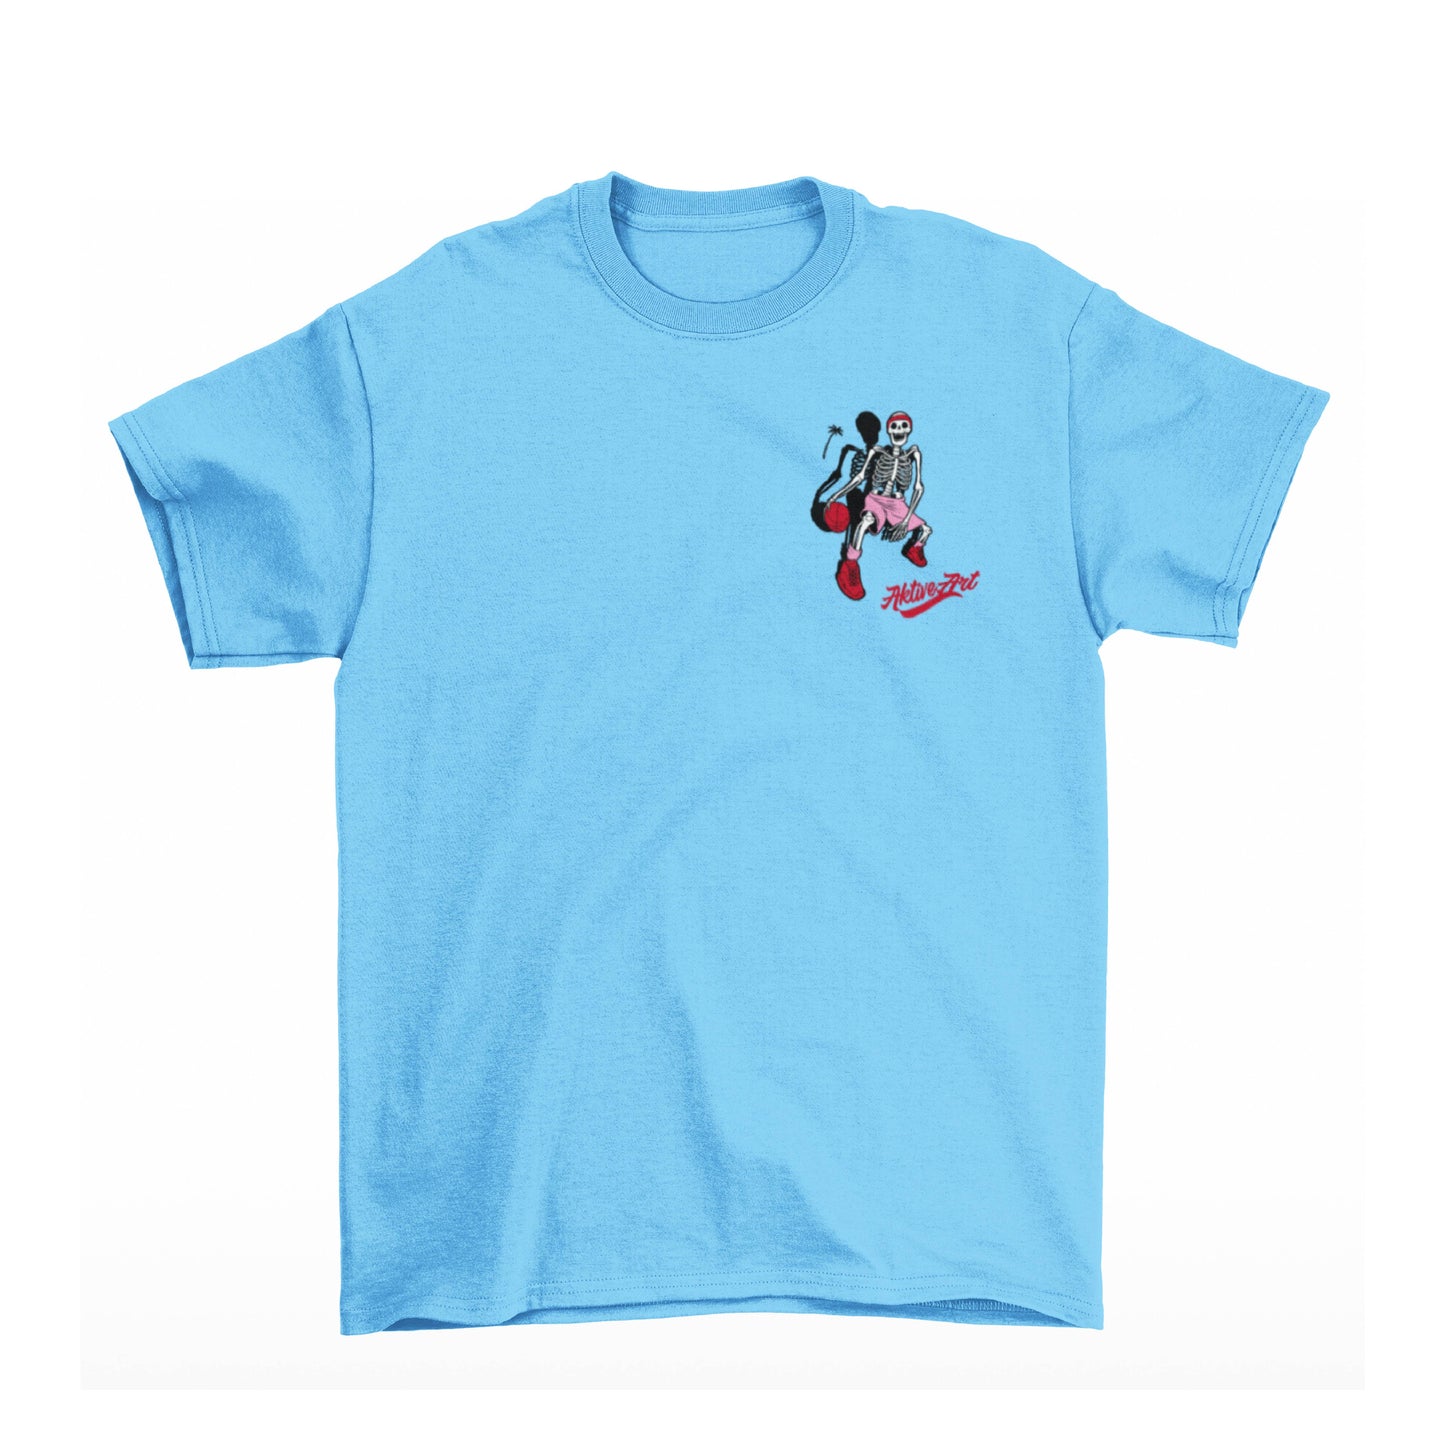 "BUILD YOUR LEGACY" TEE (LIGHT BLUE)